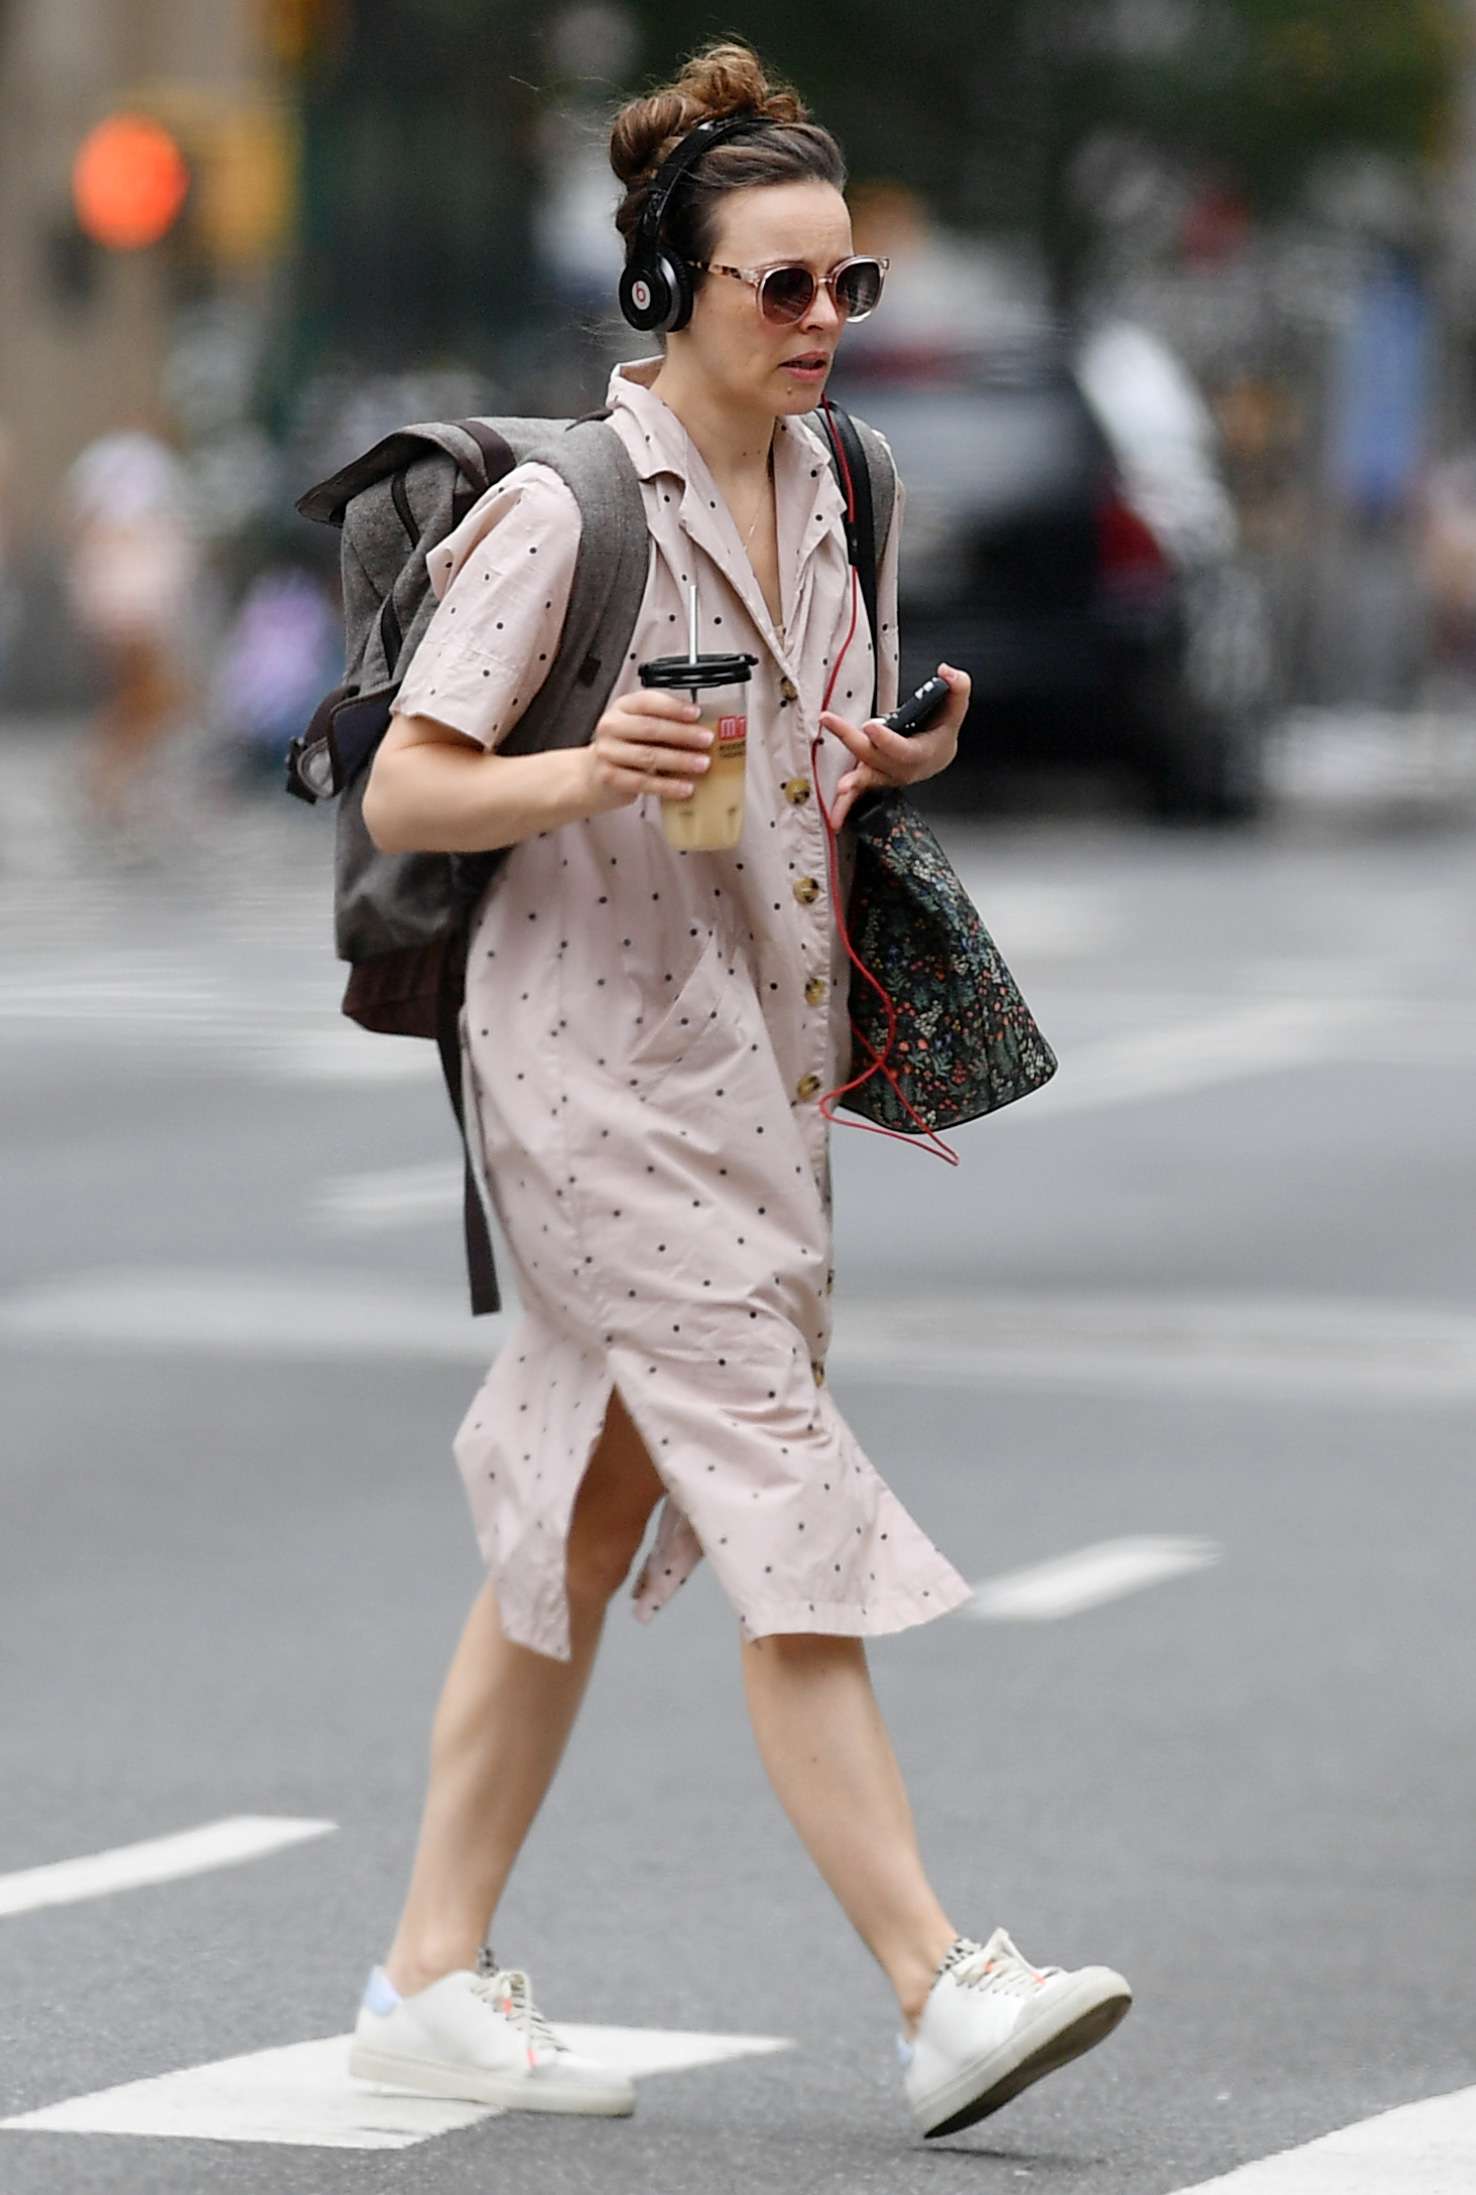 Rachel McAdams is spotted on a coffee run in New York City. The American actress and broadway star wore Beats headphones, backpack, polka dot dress